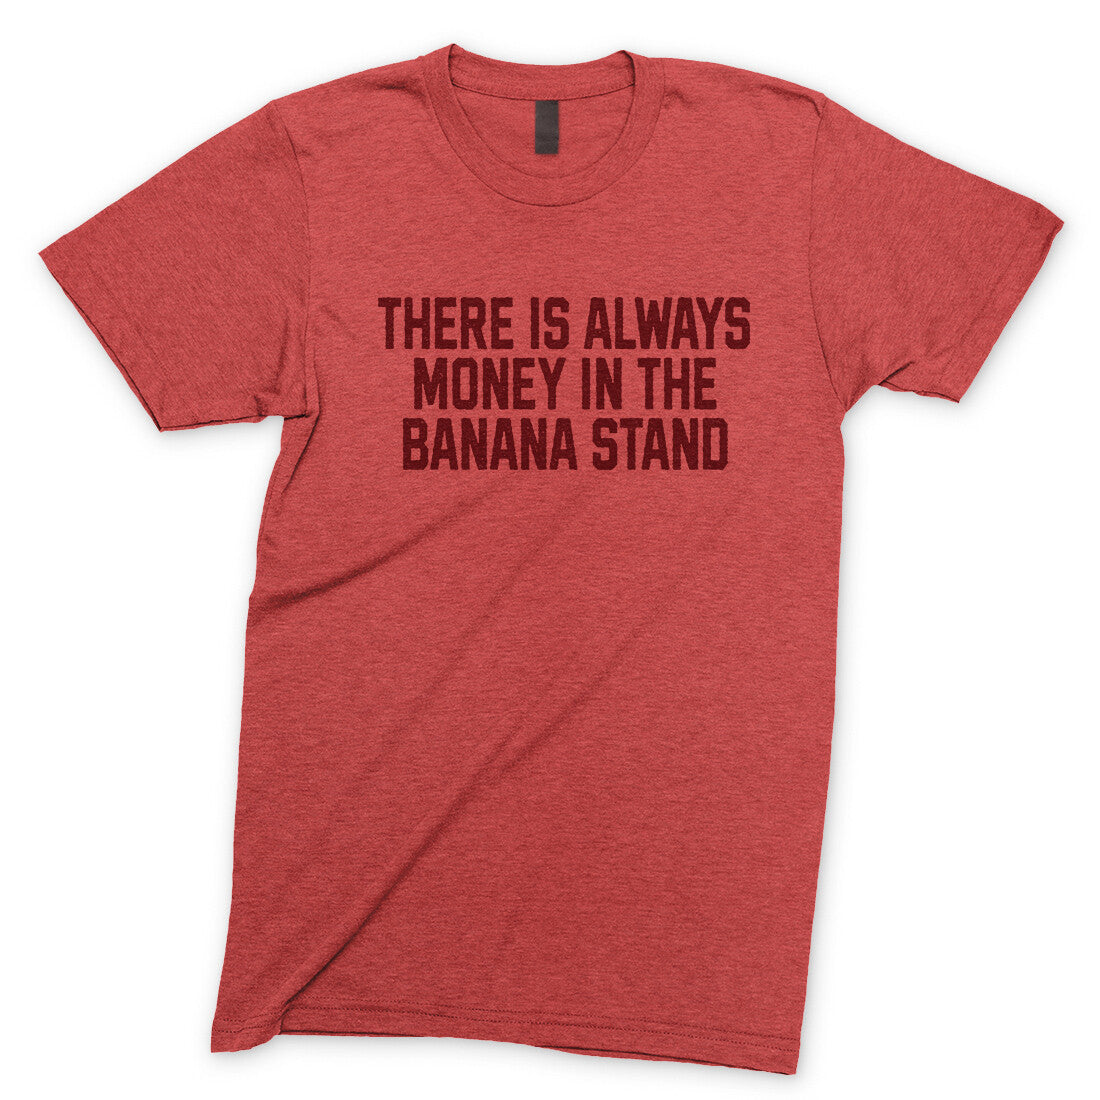 There is Always Money in the Banana Stand in Heather Red Color